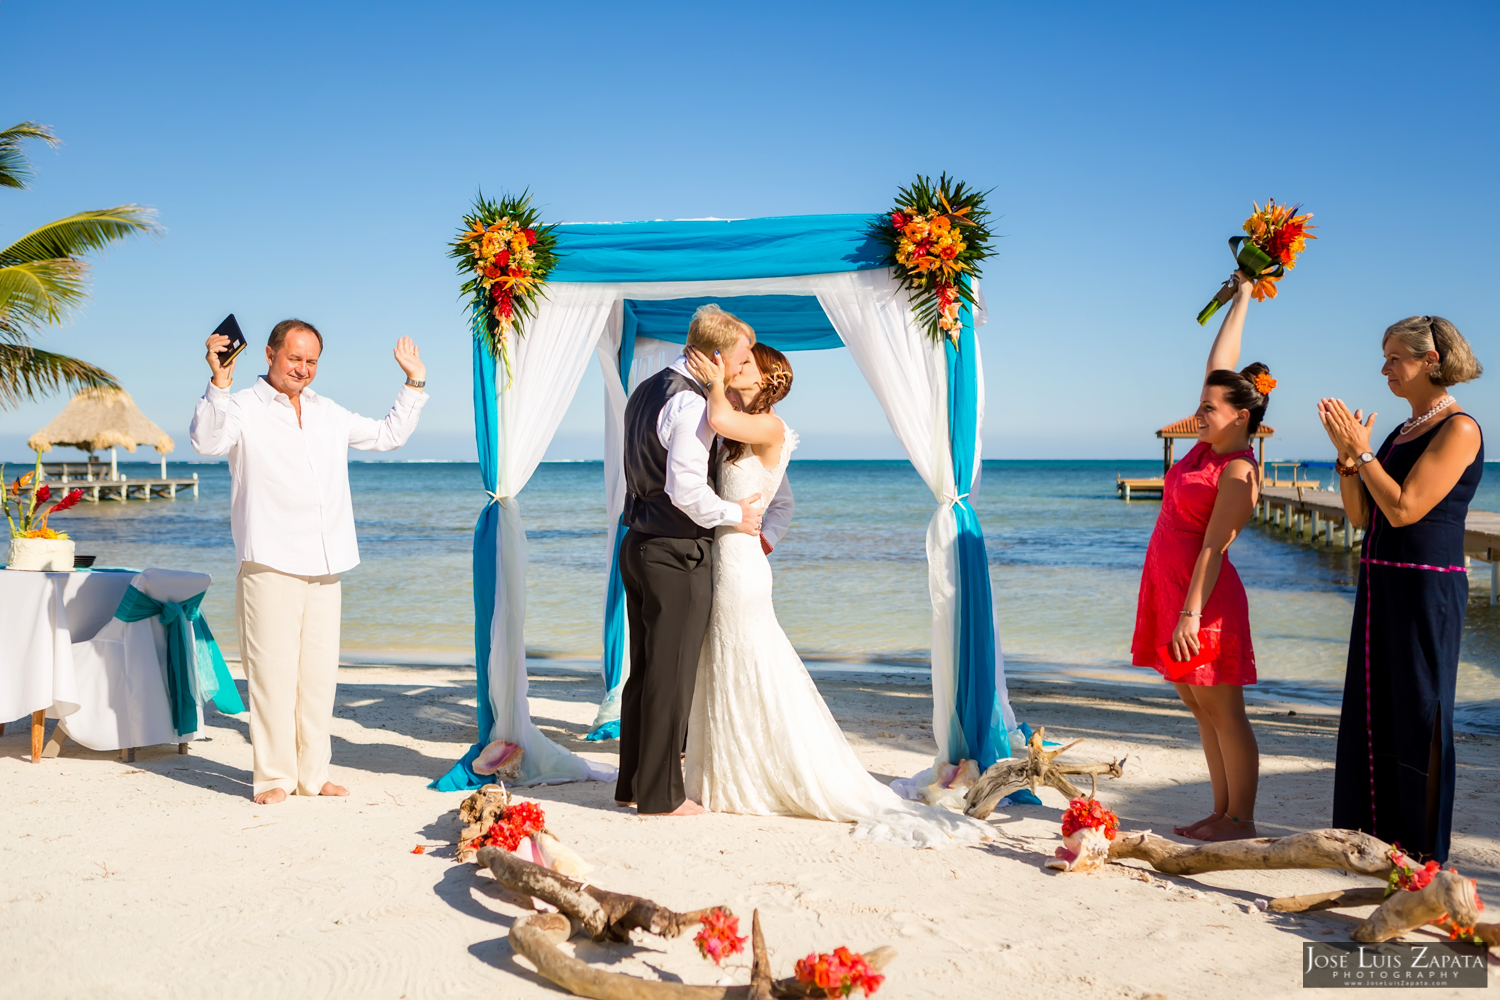 Leap Year Wedding in Belize - Jose Luis Zapata Photography - Belize Photographer (14)